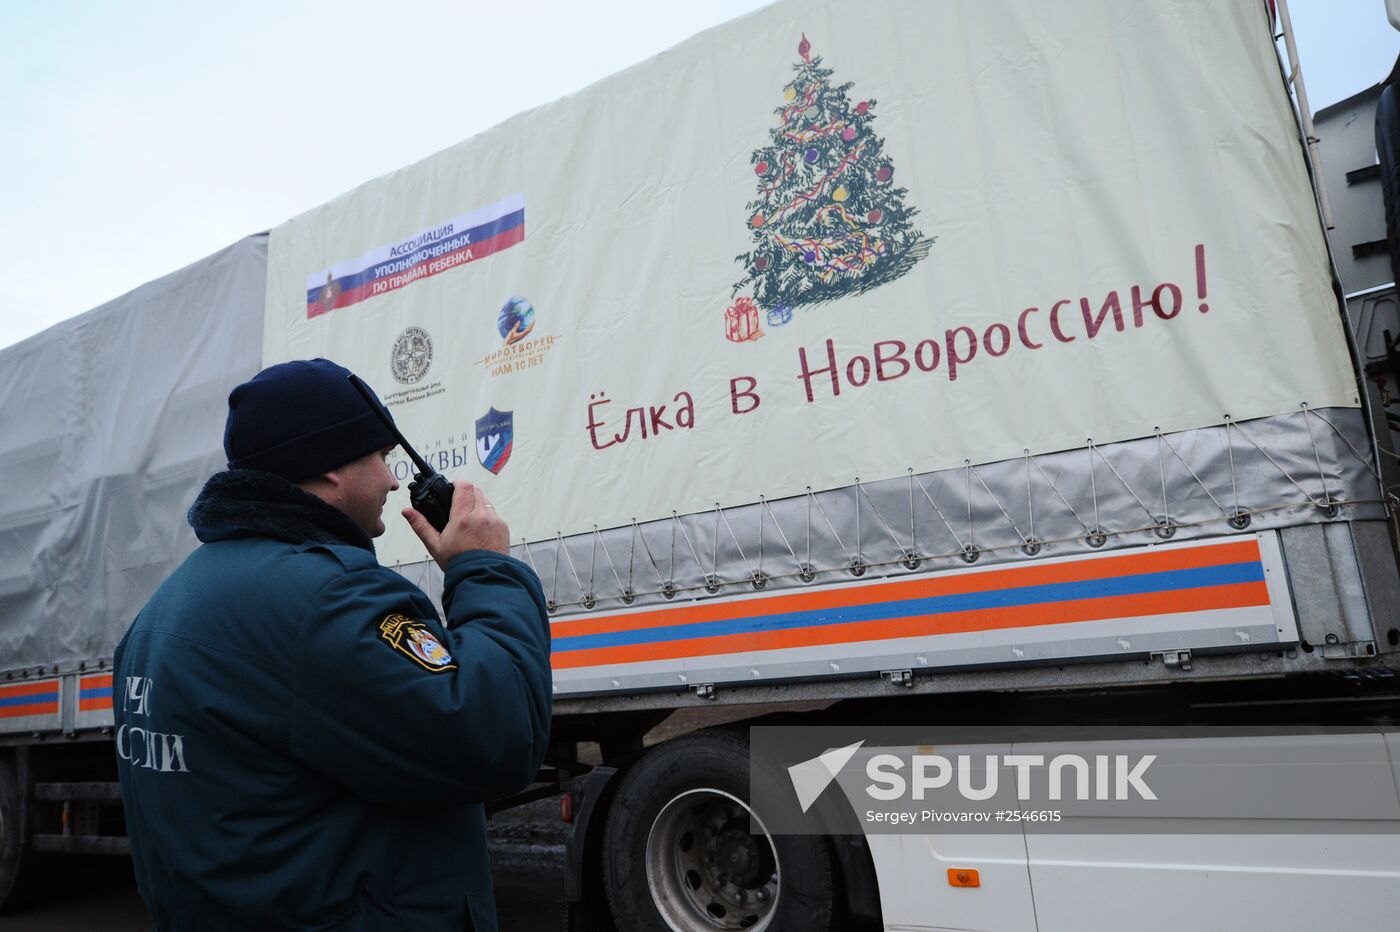 Tenth humanitarian aid convoy for Donbas formed in Rostov Region